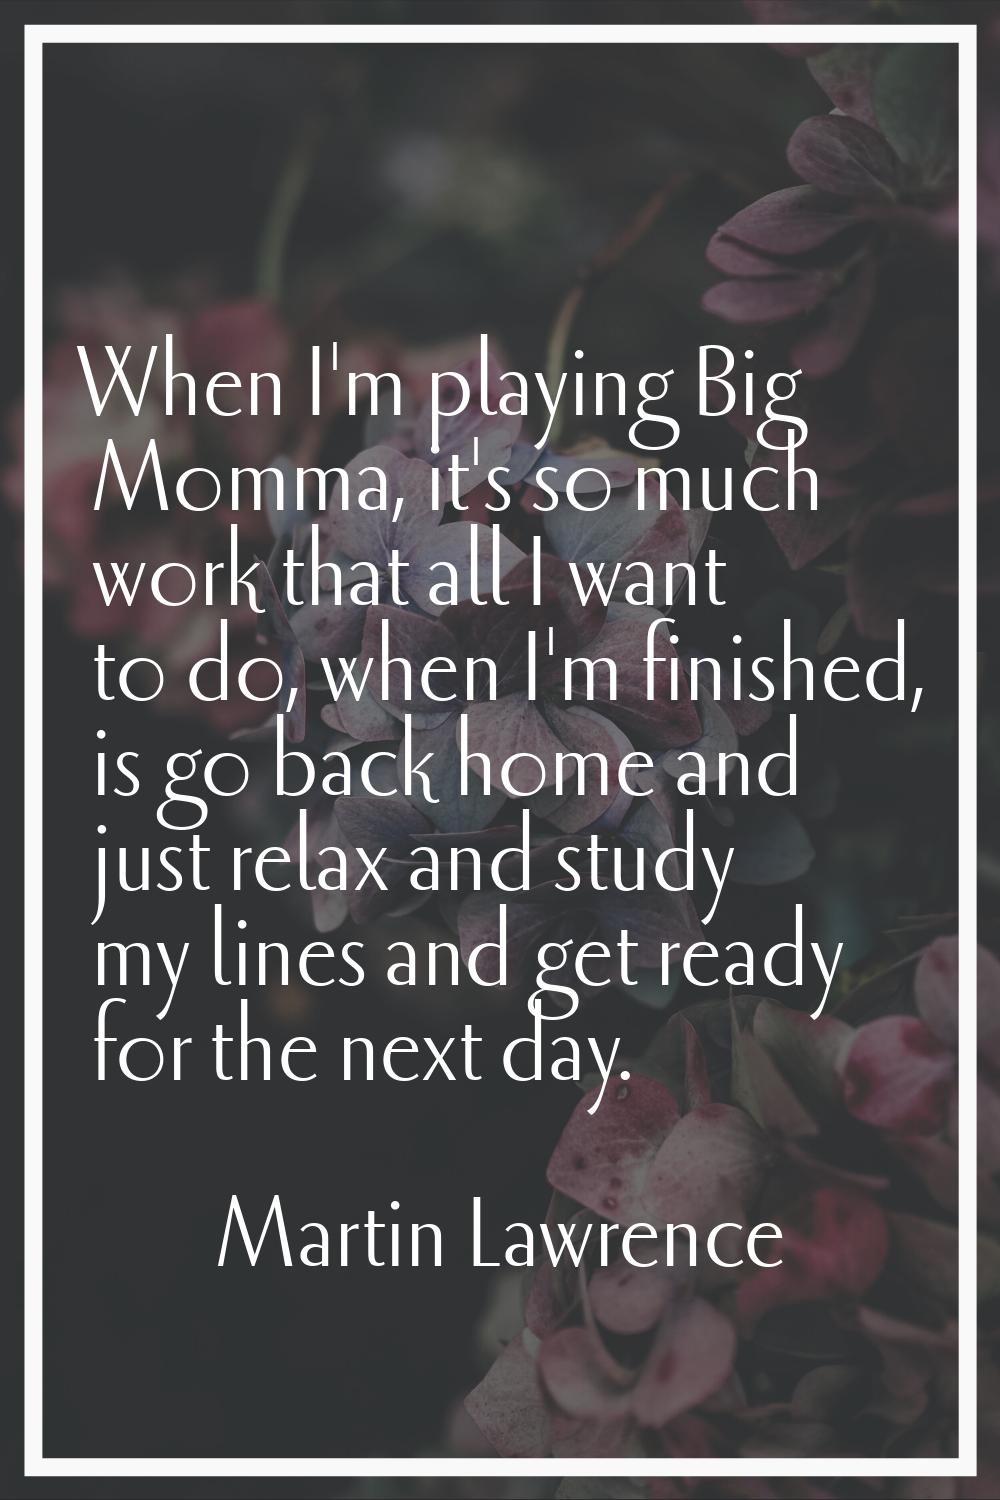 When I'm playing Big Momma, it's so much work that all I want to do, when I'm finished, is go back 